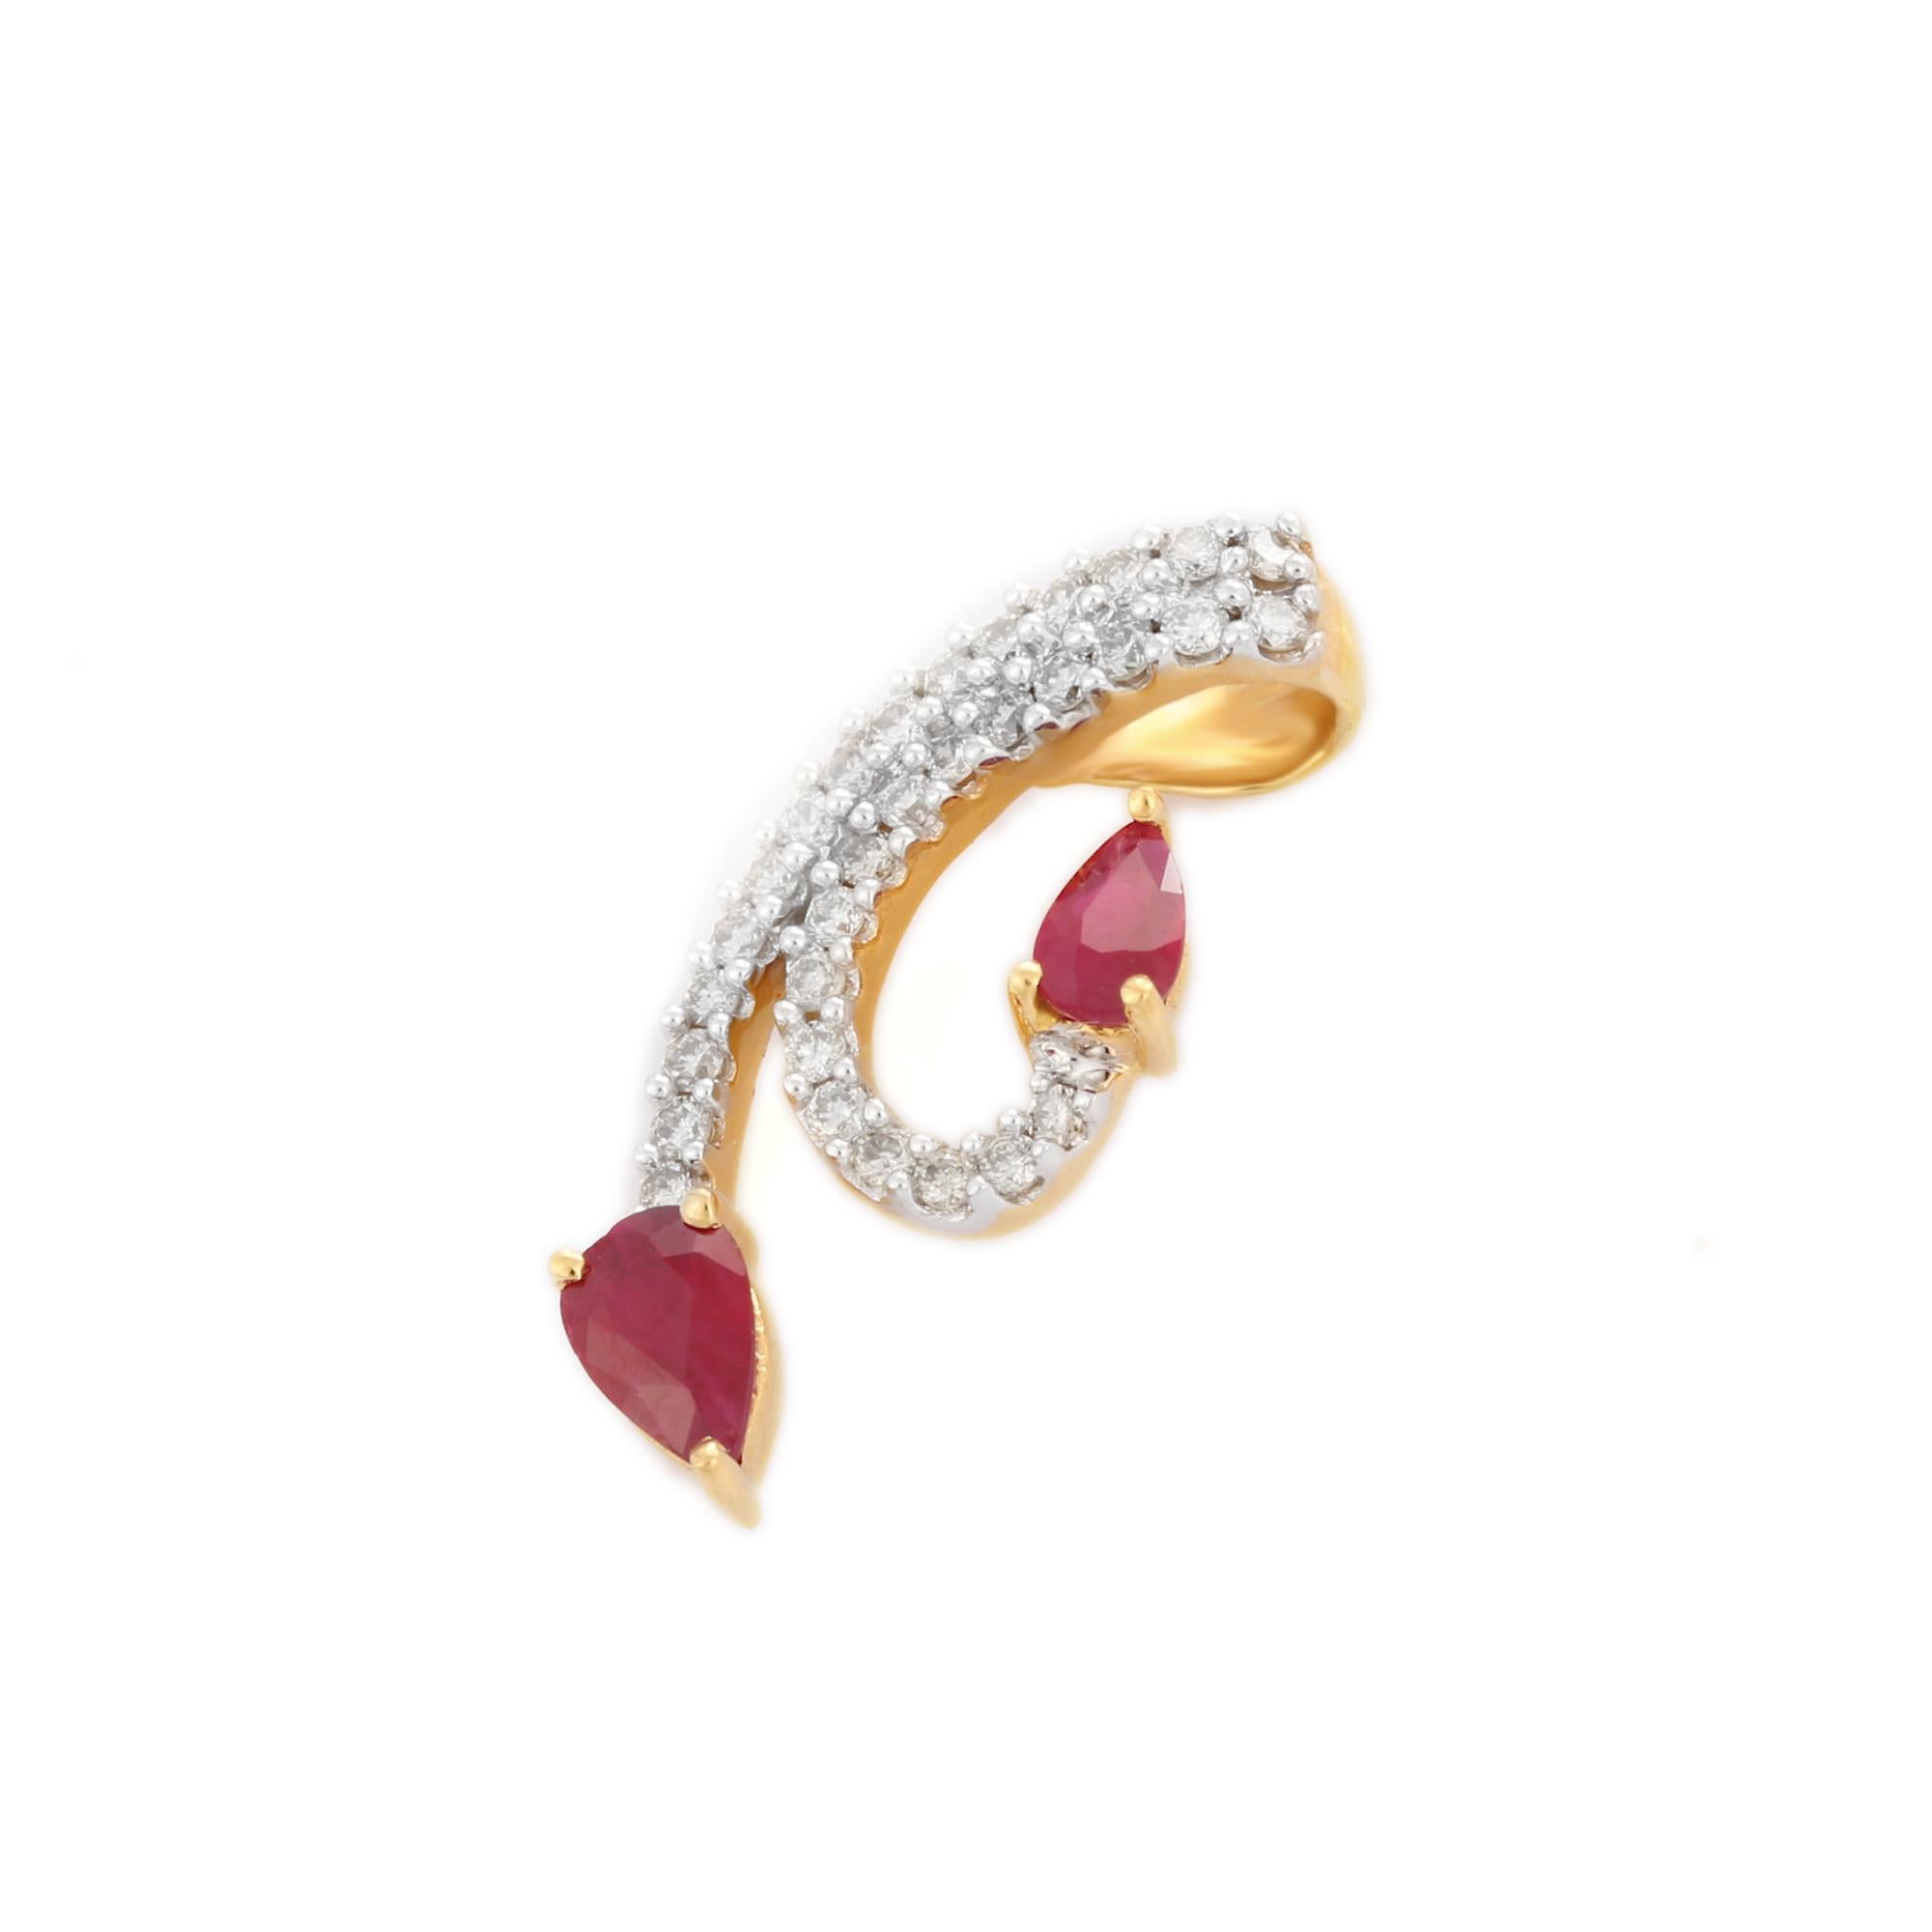 Art nouveau pear cut ruby diamond pendant in 18K Gold. It has a pear cut ruby with diamonds that completes your look with a decent touch. Pendants are used to wear or gifted to represent love and promises. It's an attractive jewelry piece that goes